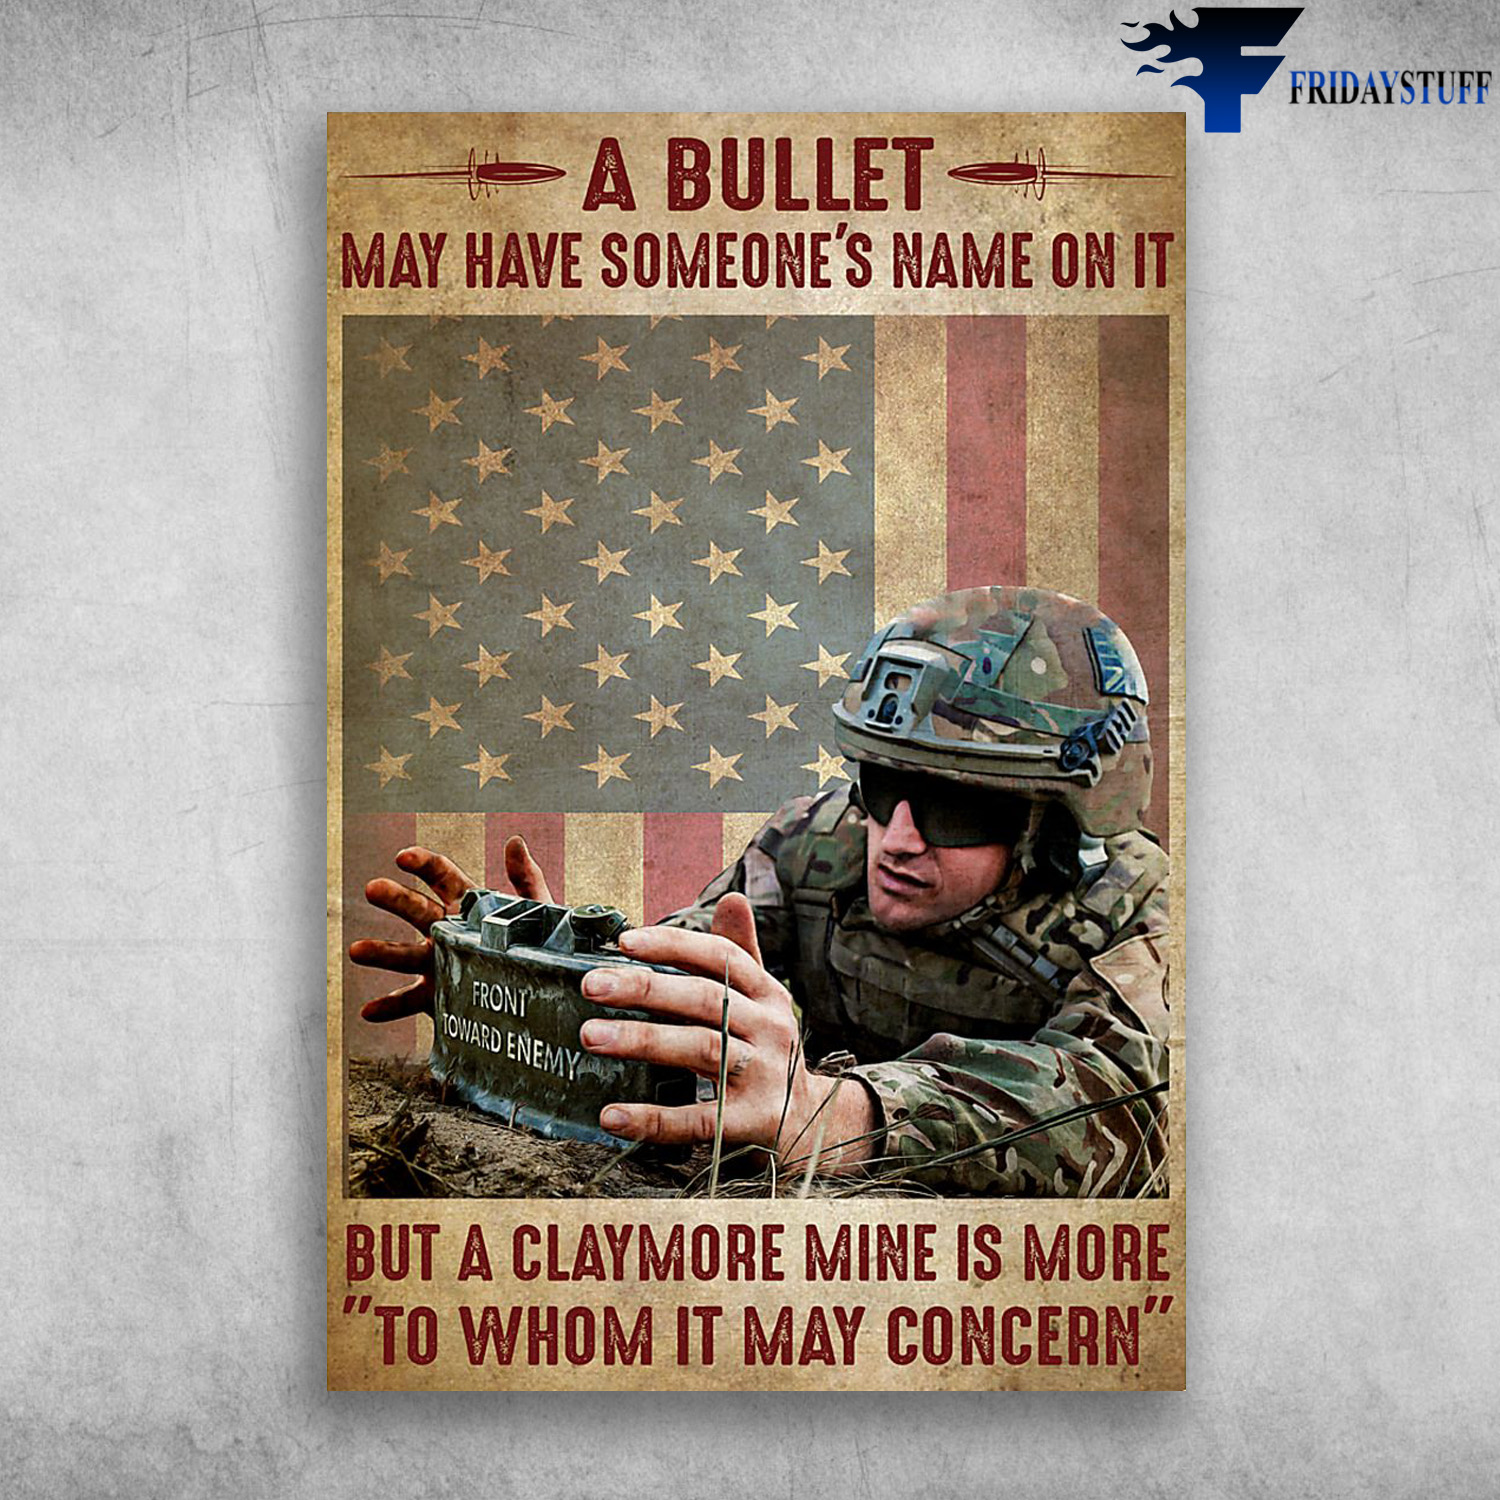 Veterans Of America - A Bullet May Have Someone's Name On It But A Claymore Mine Is More To Whom It May Concern